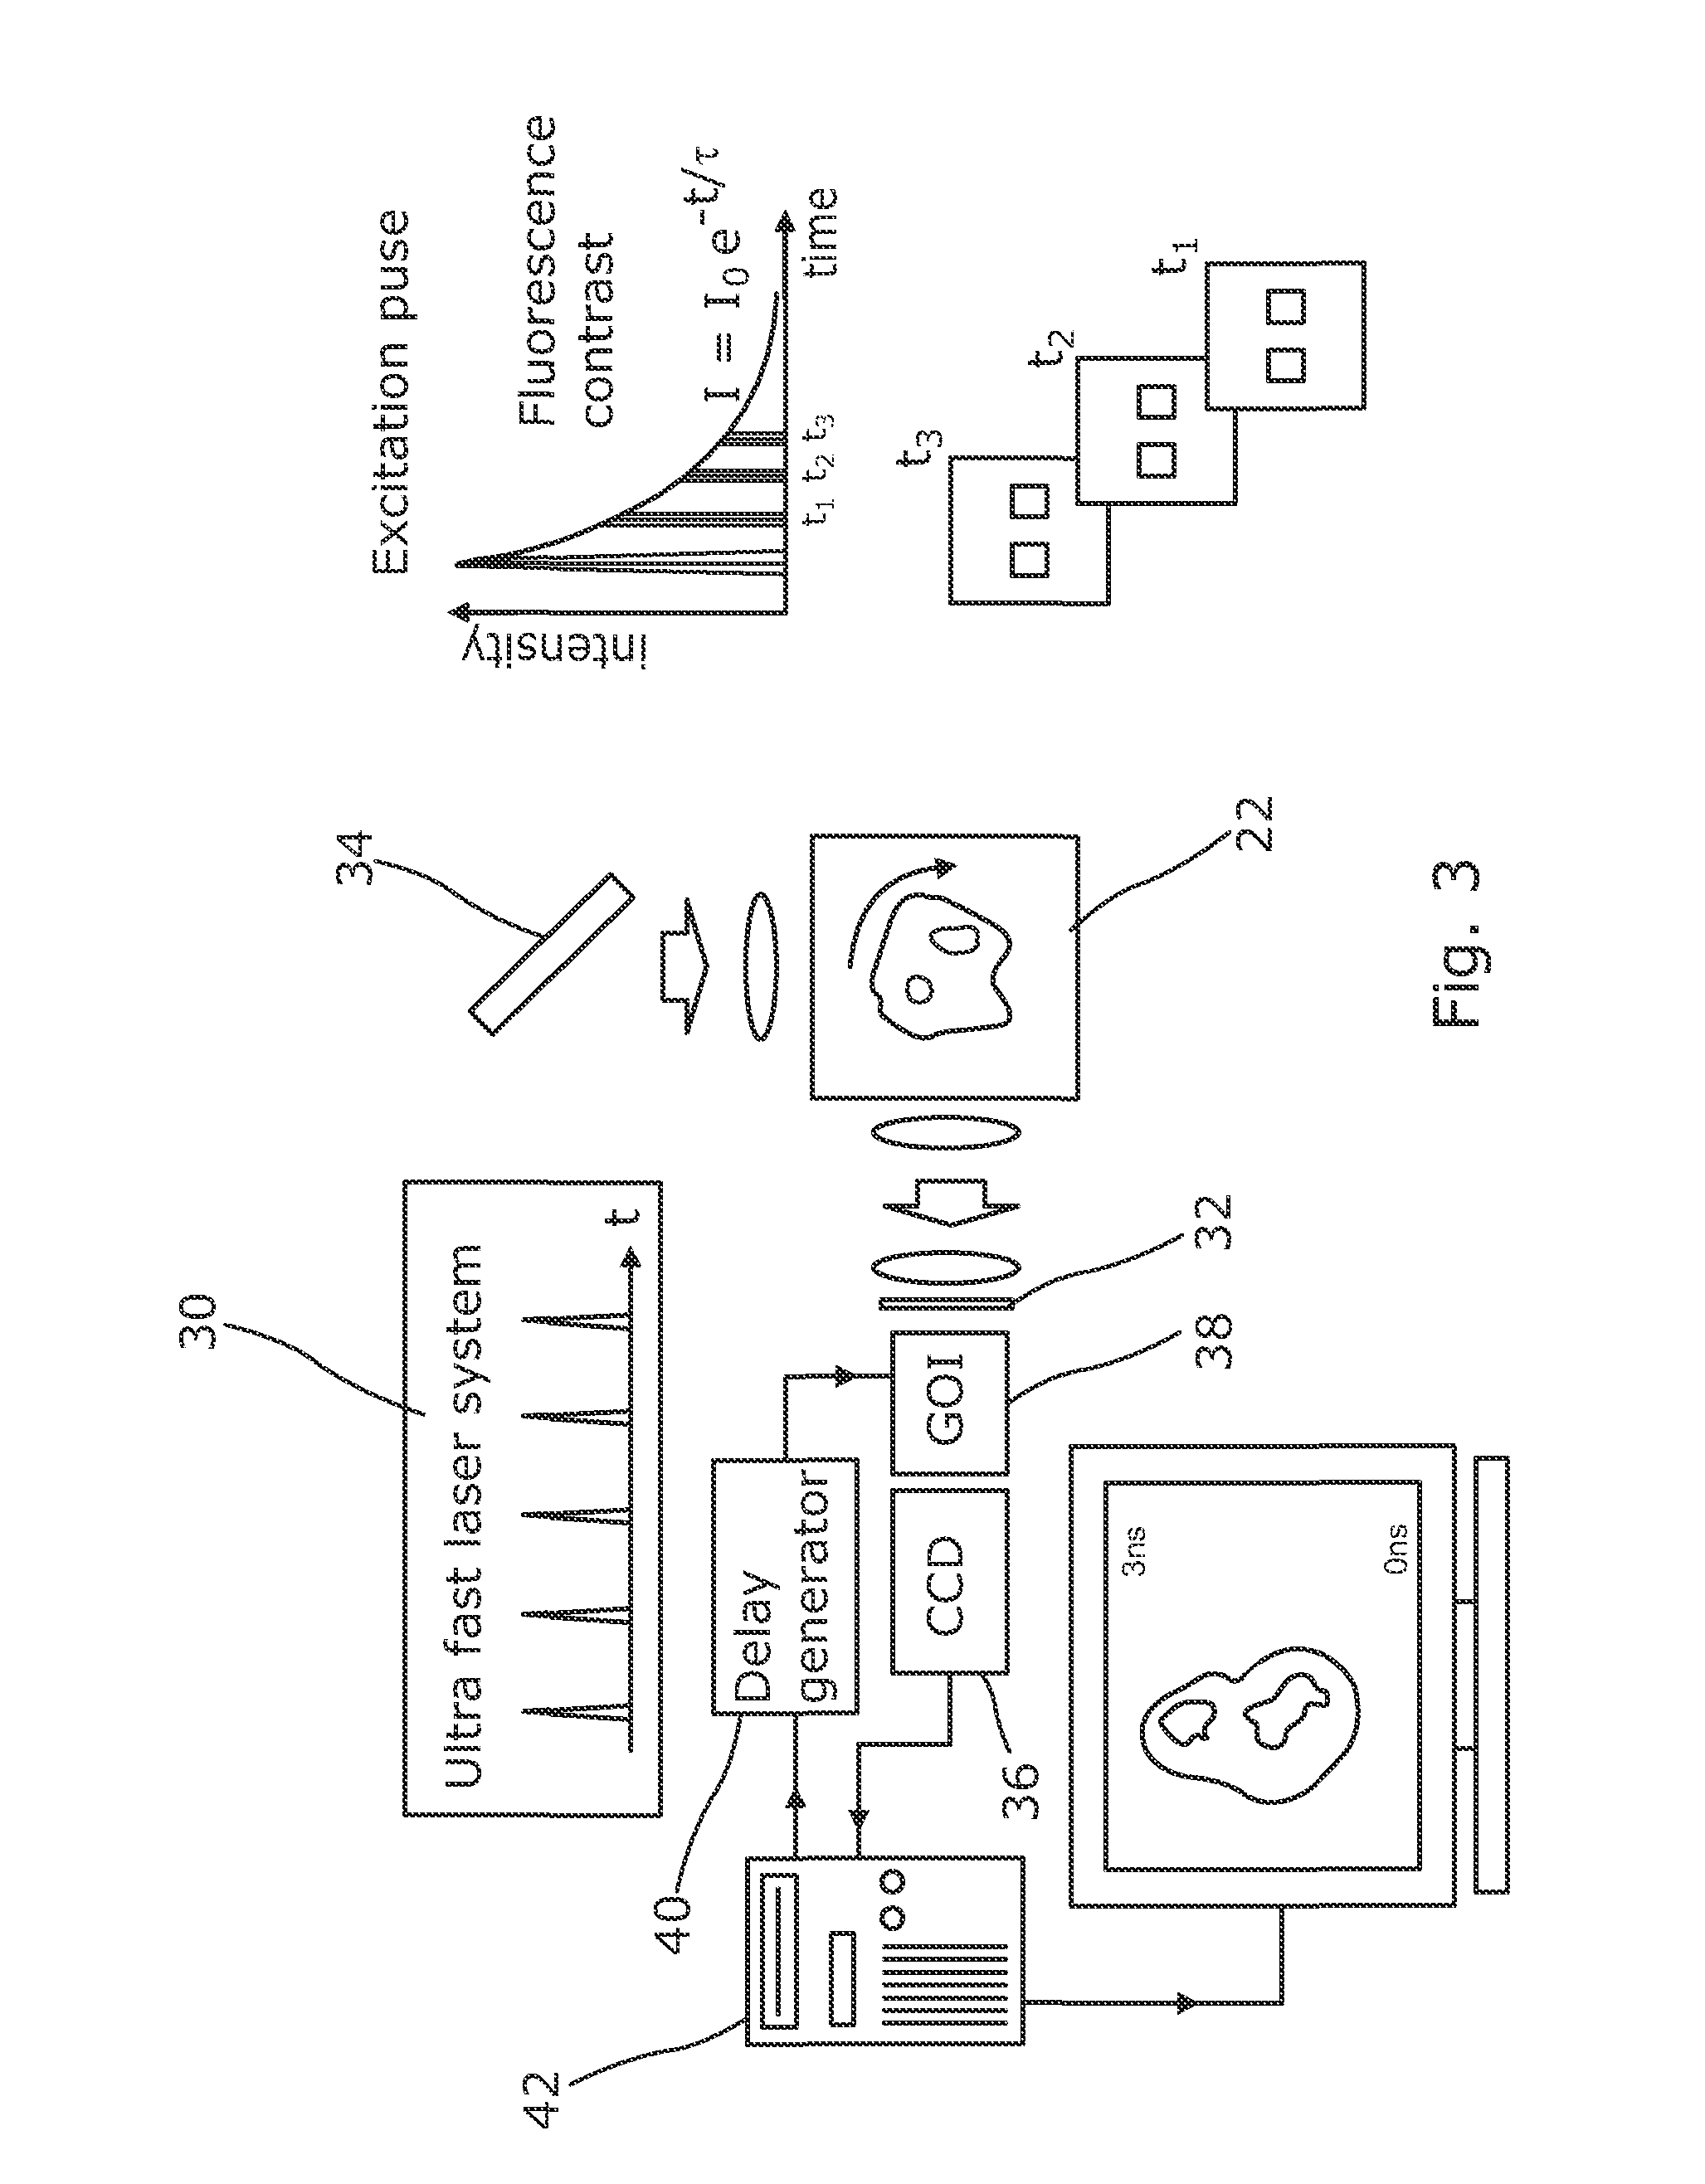 Angular multiplexed optical projection tomography